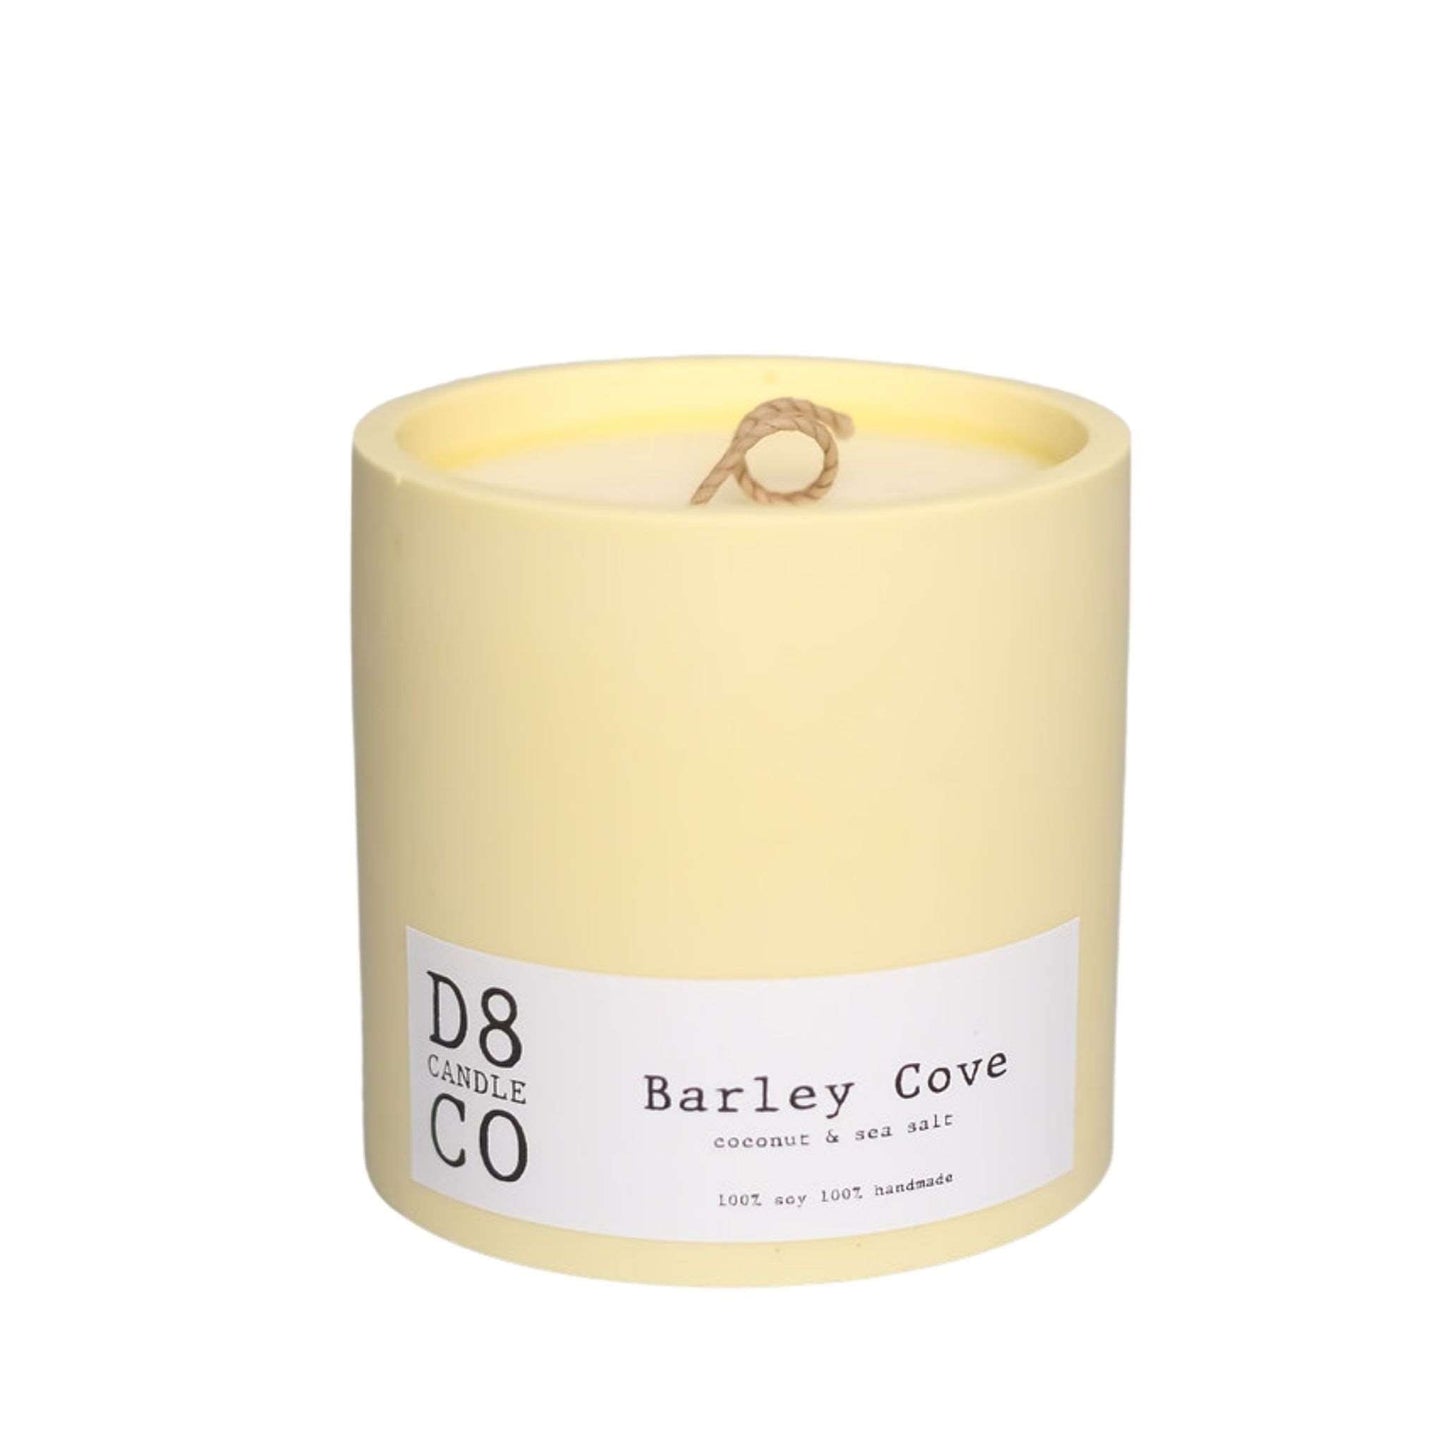 Load image into Gallery viewer, D8 Candle Co. Candles Barley Cove Candle - D8 Candle Co.
